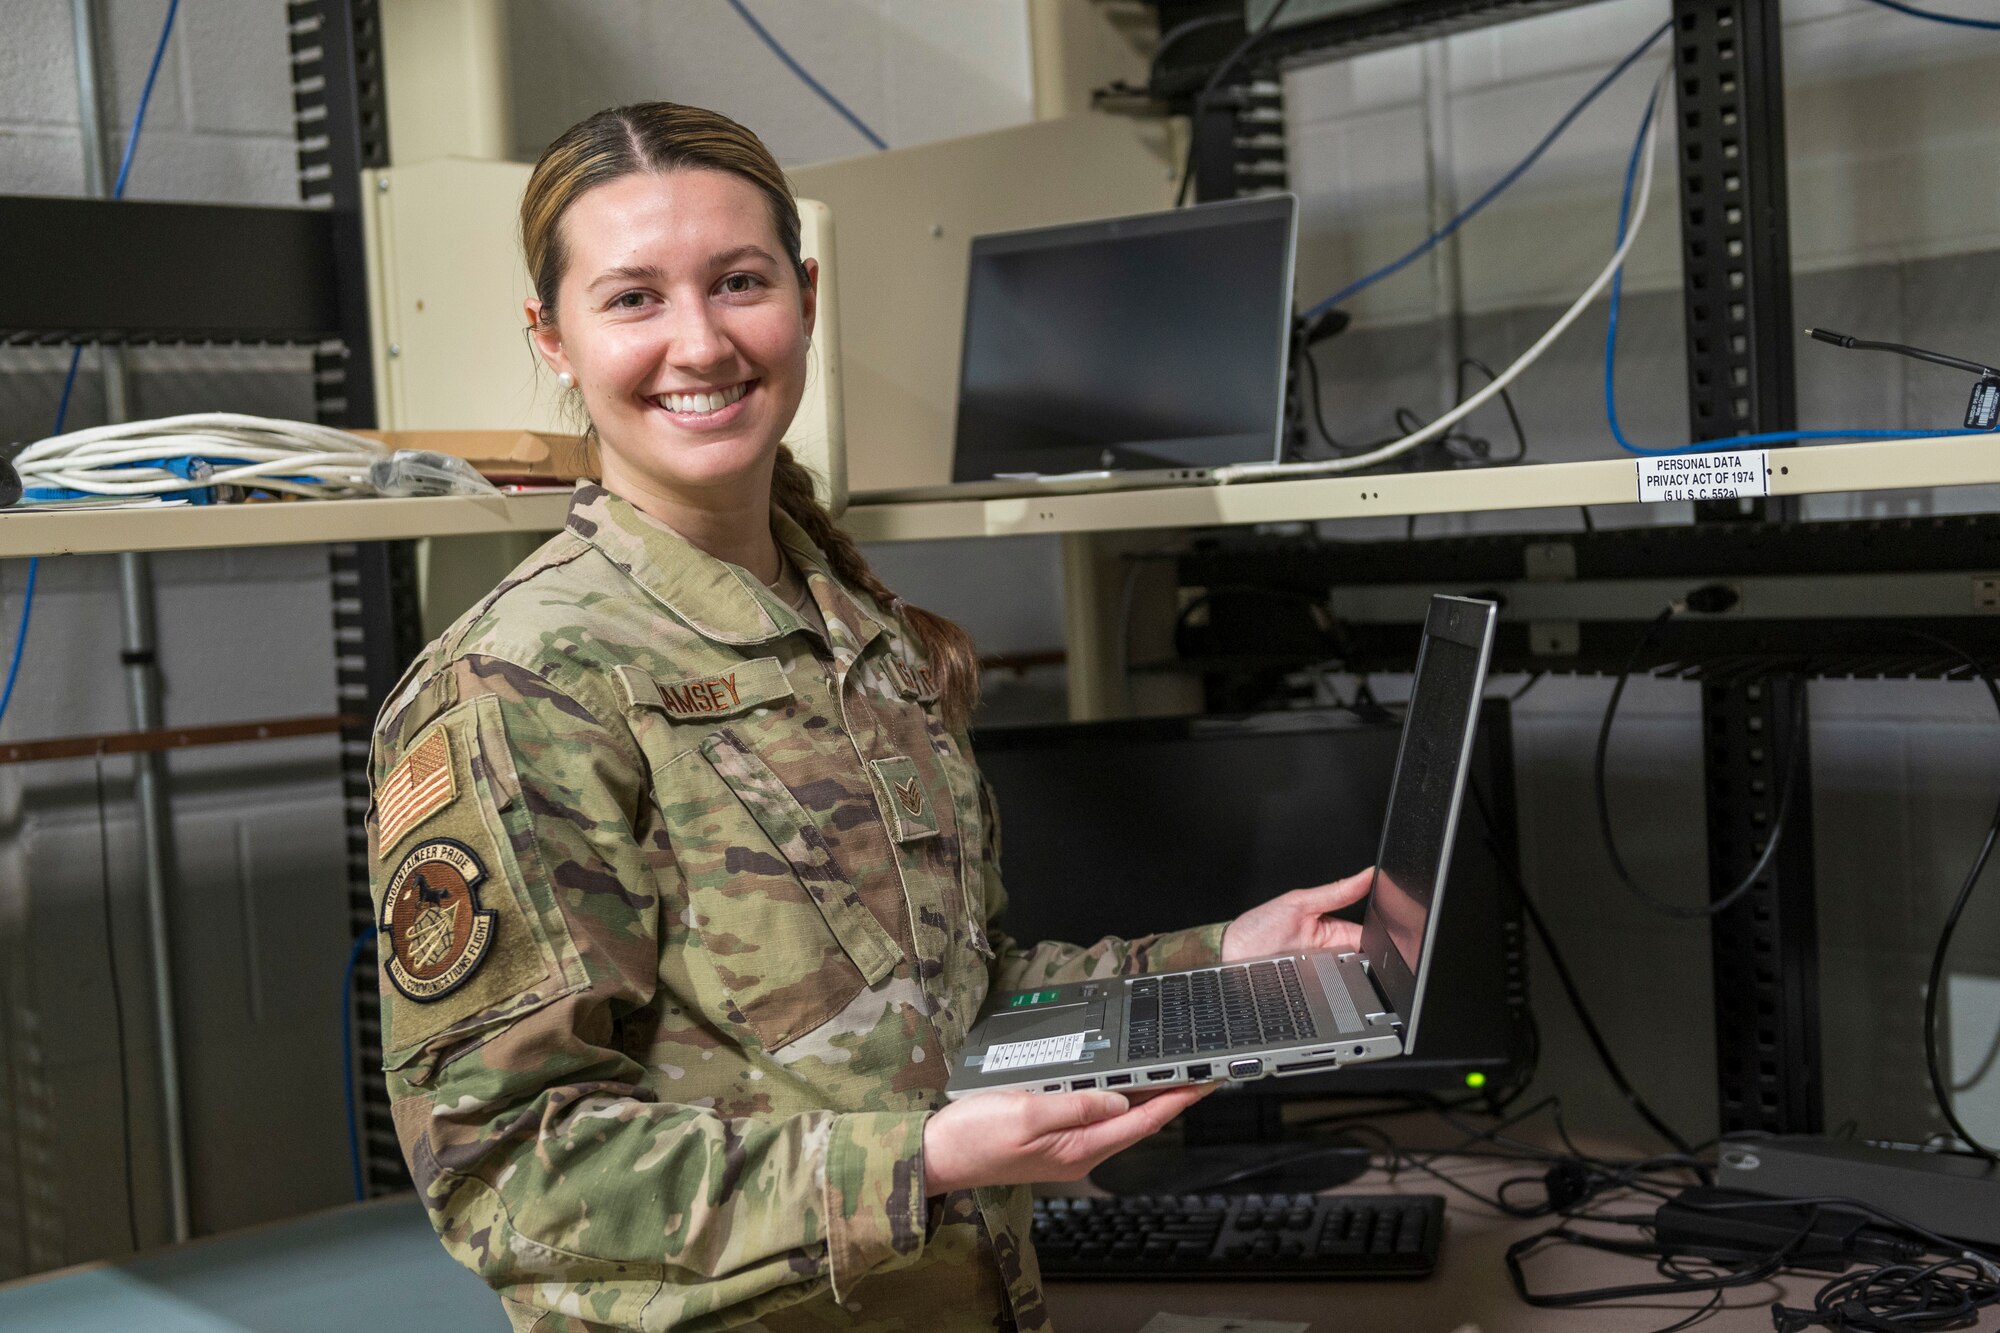 Staff Sgt. Shayla Ramsey is a client service technician for the 167th Communications Flight and the 167th Airlift Wing Airman Spotlight for March 2023.